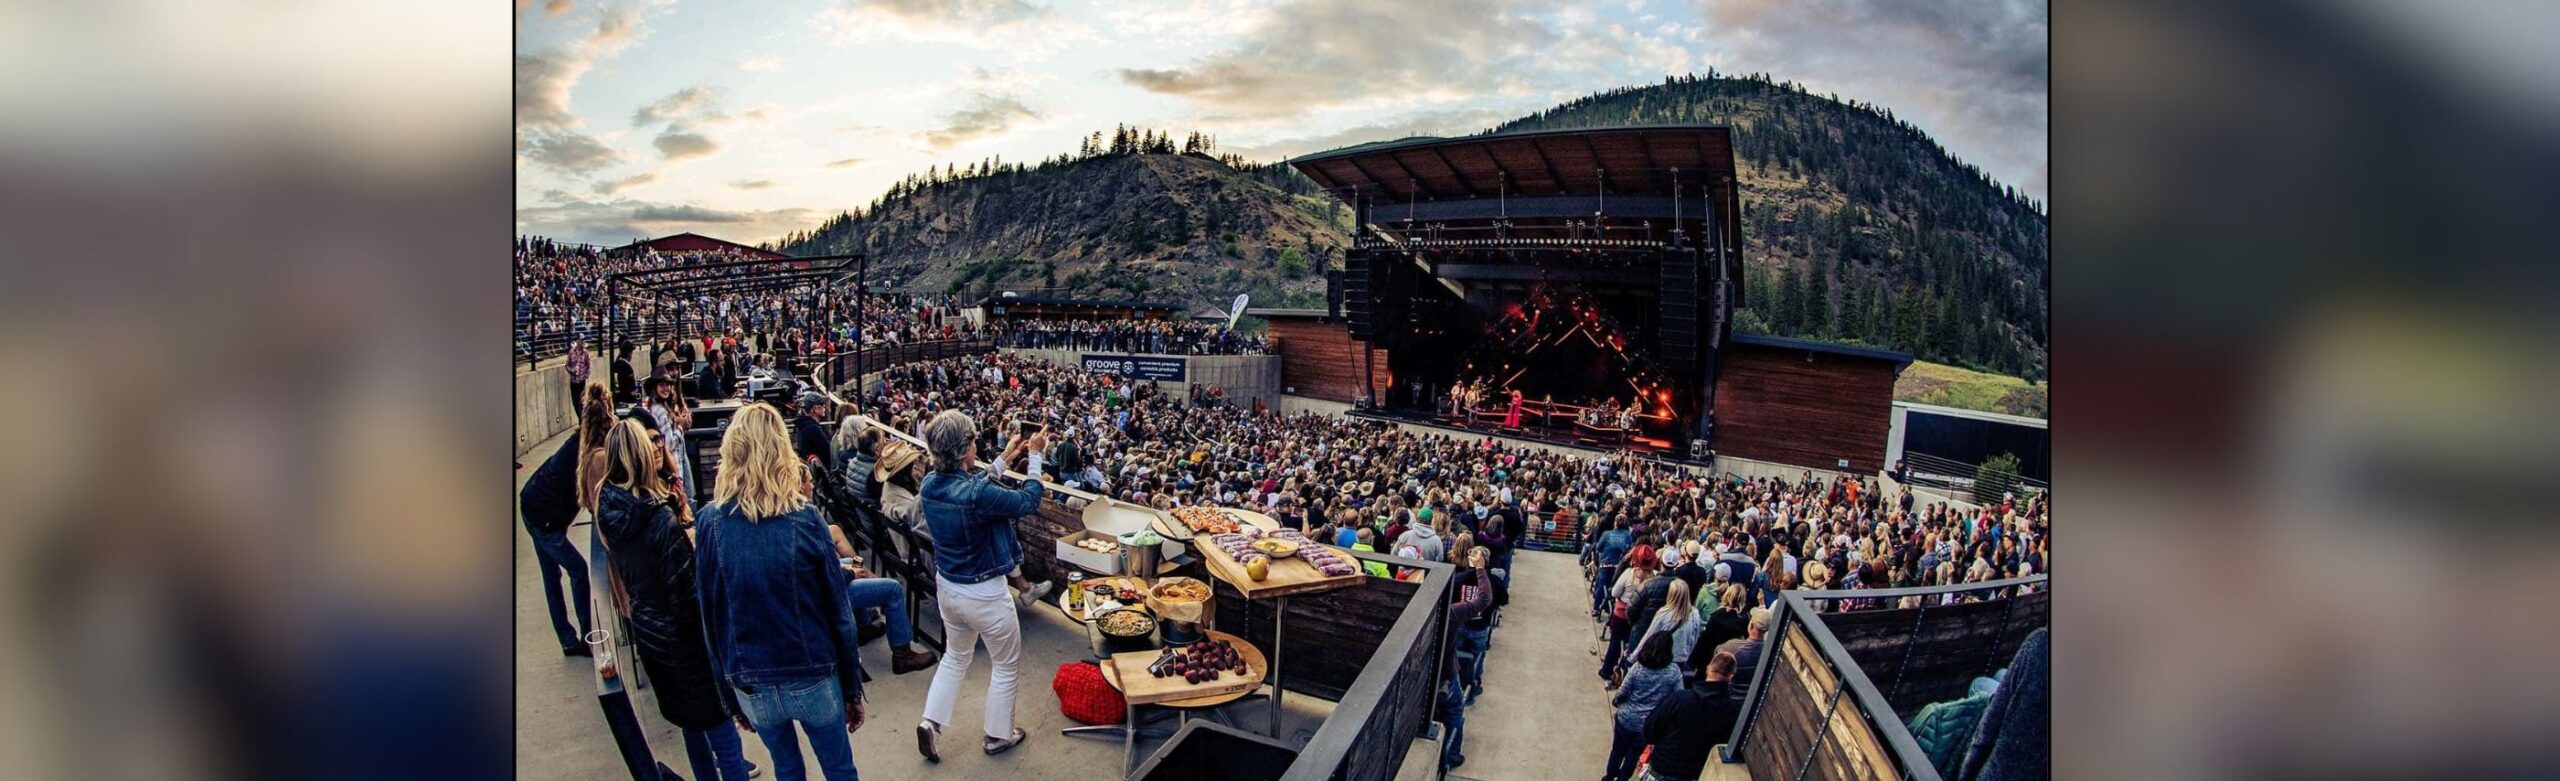 SPECIAL OFFER: Premium Box Released for Blues Traveler + Big Head Todd and The Monsters at KettleHouse Amphitheater Image